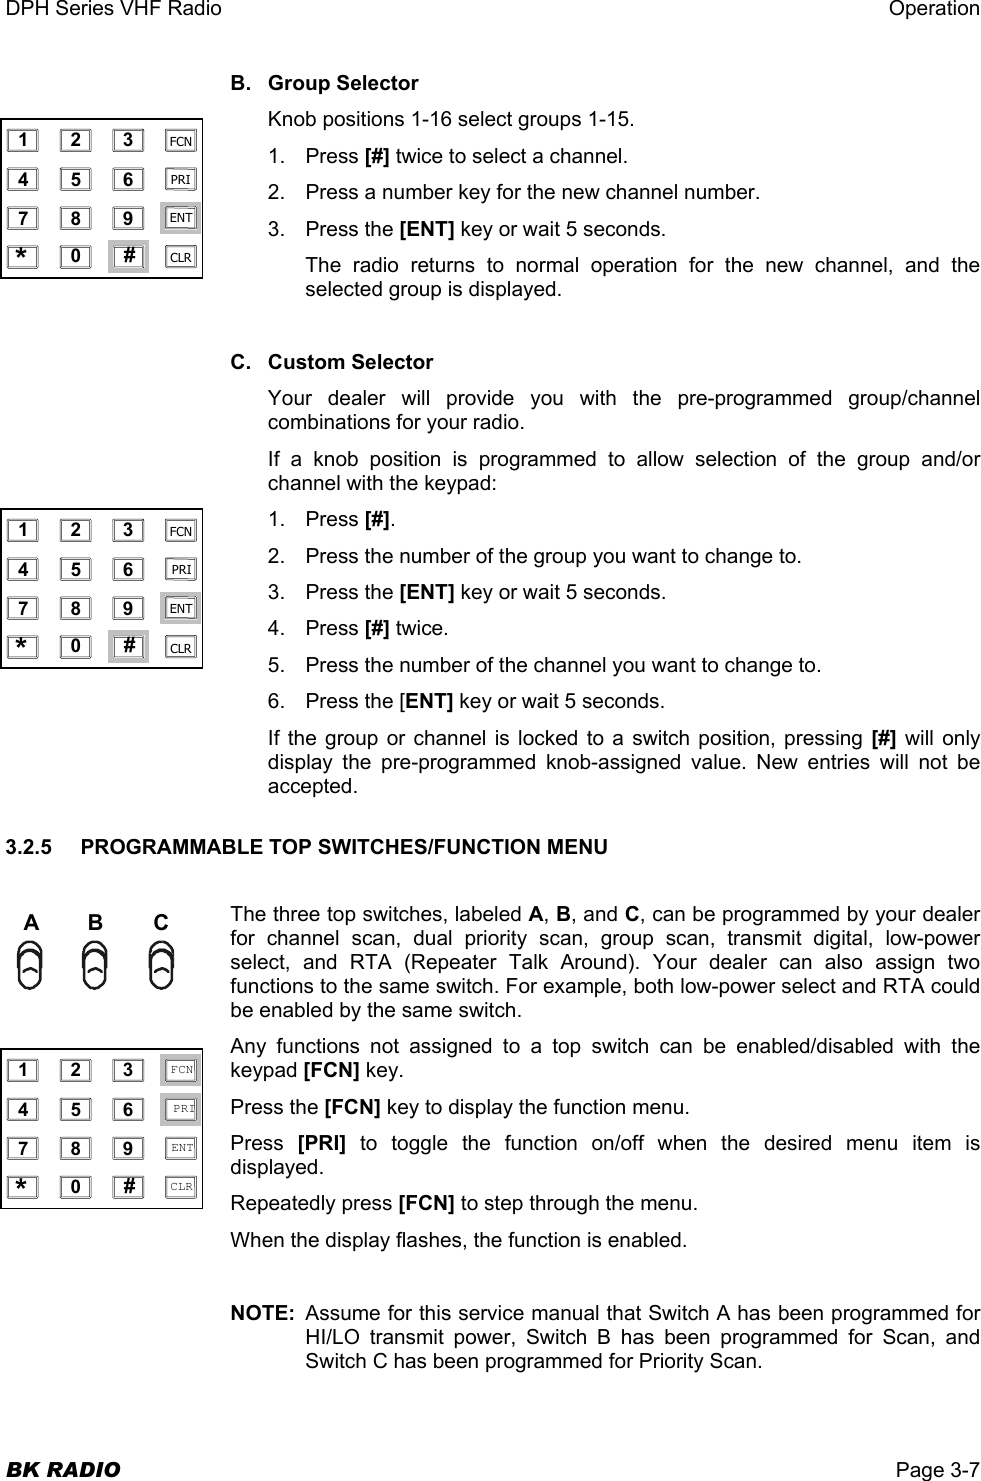 DPH Series VHF Radio  Operation  BK RADIO  Page 3-7 B. Group Selector Knob positions 1-16 select groups 1-15. 1. Press [#] twice to select a channel. 2.  Press a number key for the new channel number. 3. Press the [ENT] key or wait 5 seconds.  The radio returns to normal operation for the new channel, and the selected group is displayed.   C. Custom Selector Your dealer will provide you with the pre-programmed group/channel combinations for your radio. If a knob position is programmed to allow selection of the group and/or channel with the keypad: 1. Press [#]. 2.  Press the number of the group you want to change to. 3. Press the [ENT] key or wait 5 seconds. 4. Press [#] twice. 5.  Press the number of the channel you want to change to. 6.  Press the [ENT] key or wait 5 seconds. If the group or channel is locked to a switch position, pressing [#] will only display the pre-programmed knob-assigned value. New entries will not be accepted. 3.2.5    PROGRAMMABLE TOP SWITCHES/FUNCTION MENU  The three top switches, labeled A, B, and C, can be programmed by your dealer for channel scan, dual priority scan, group scan, transmit digital, low-power select, and RTA (Repeater Talk Around). Your dealer can also assign two functions to the same switch. For example, both low-power select and RTA could be enabled by the same switch. Any functions not assigned to a top switch can be enabled/disabled with the keypad [FCN] key. Press the [FCN] key to display the function menu. Press  [PRI] to toggle the function on/off when the desired menu item is displayed.  Repeatedly press [FCN] to step through the menu. When the display flashes, the function is enabled.  NOTE:  Assume for this service manual that Switch A has been programmed for HI/LO transmit power, Switch B has been programmed for Scan, and Switch C has been programmed for Priority Scan. ABC 1 2 3 4 5 6 7 8 9 0 * # CLR FCN PRI ENT  1 2 3 4 5 6 7 8 9 0 * # CLR FCN PRI ENT  1 2 3 4 5 6 7 8 9 0 * # CLR FCN PRI ENT 